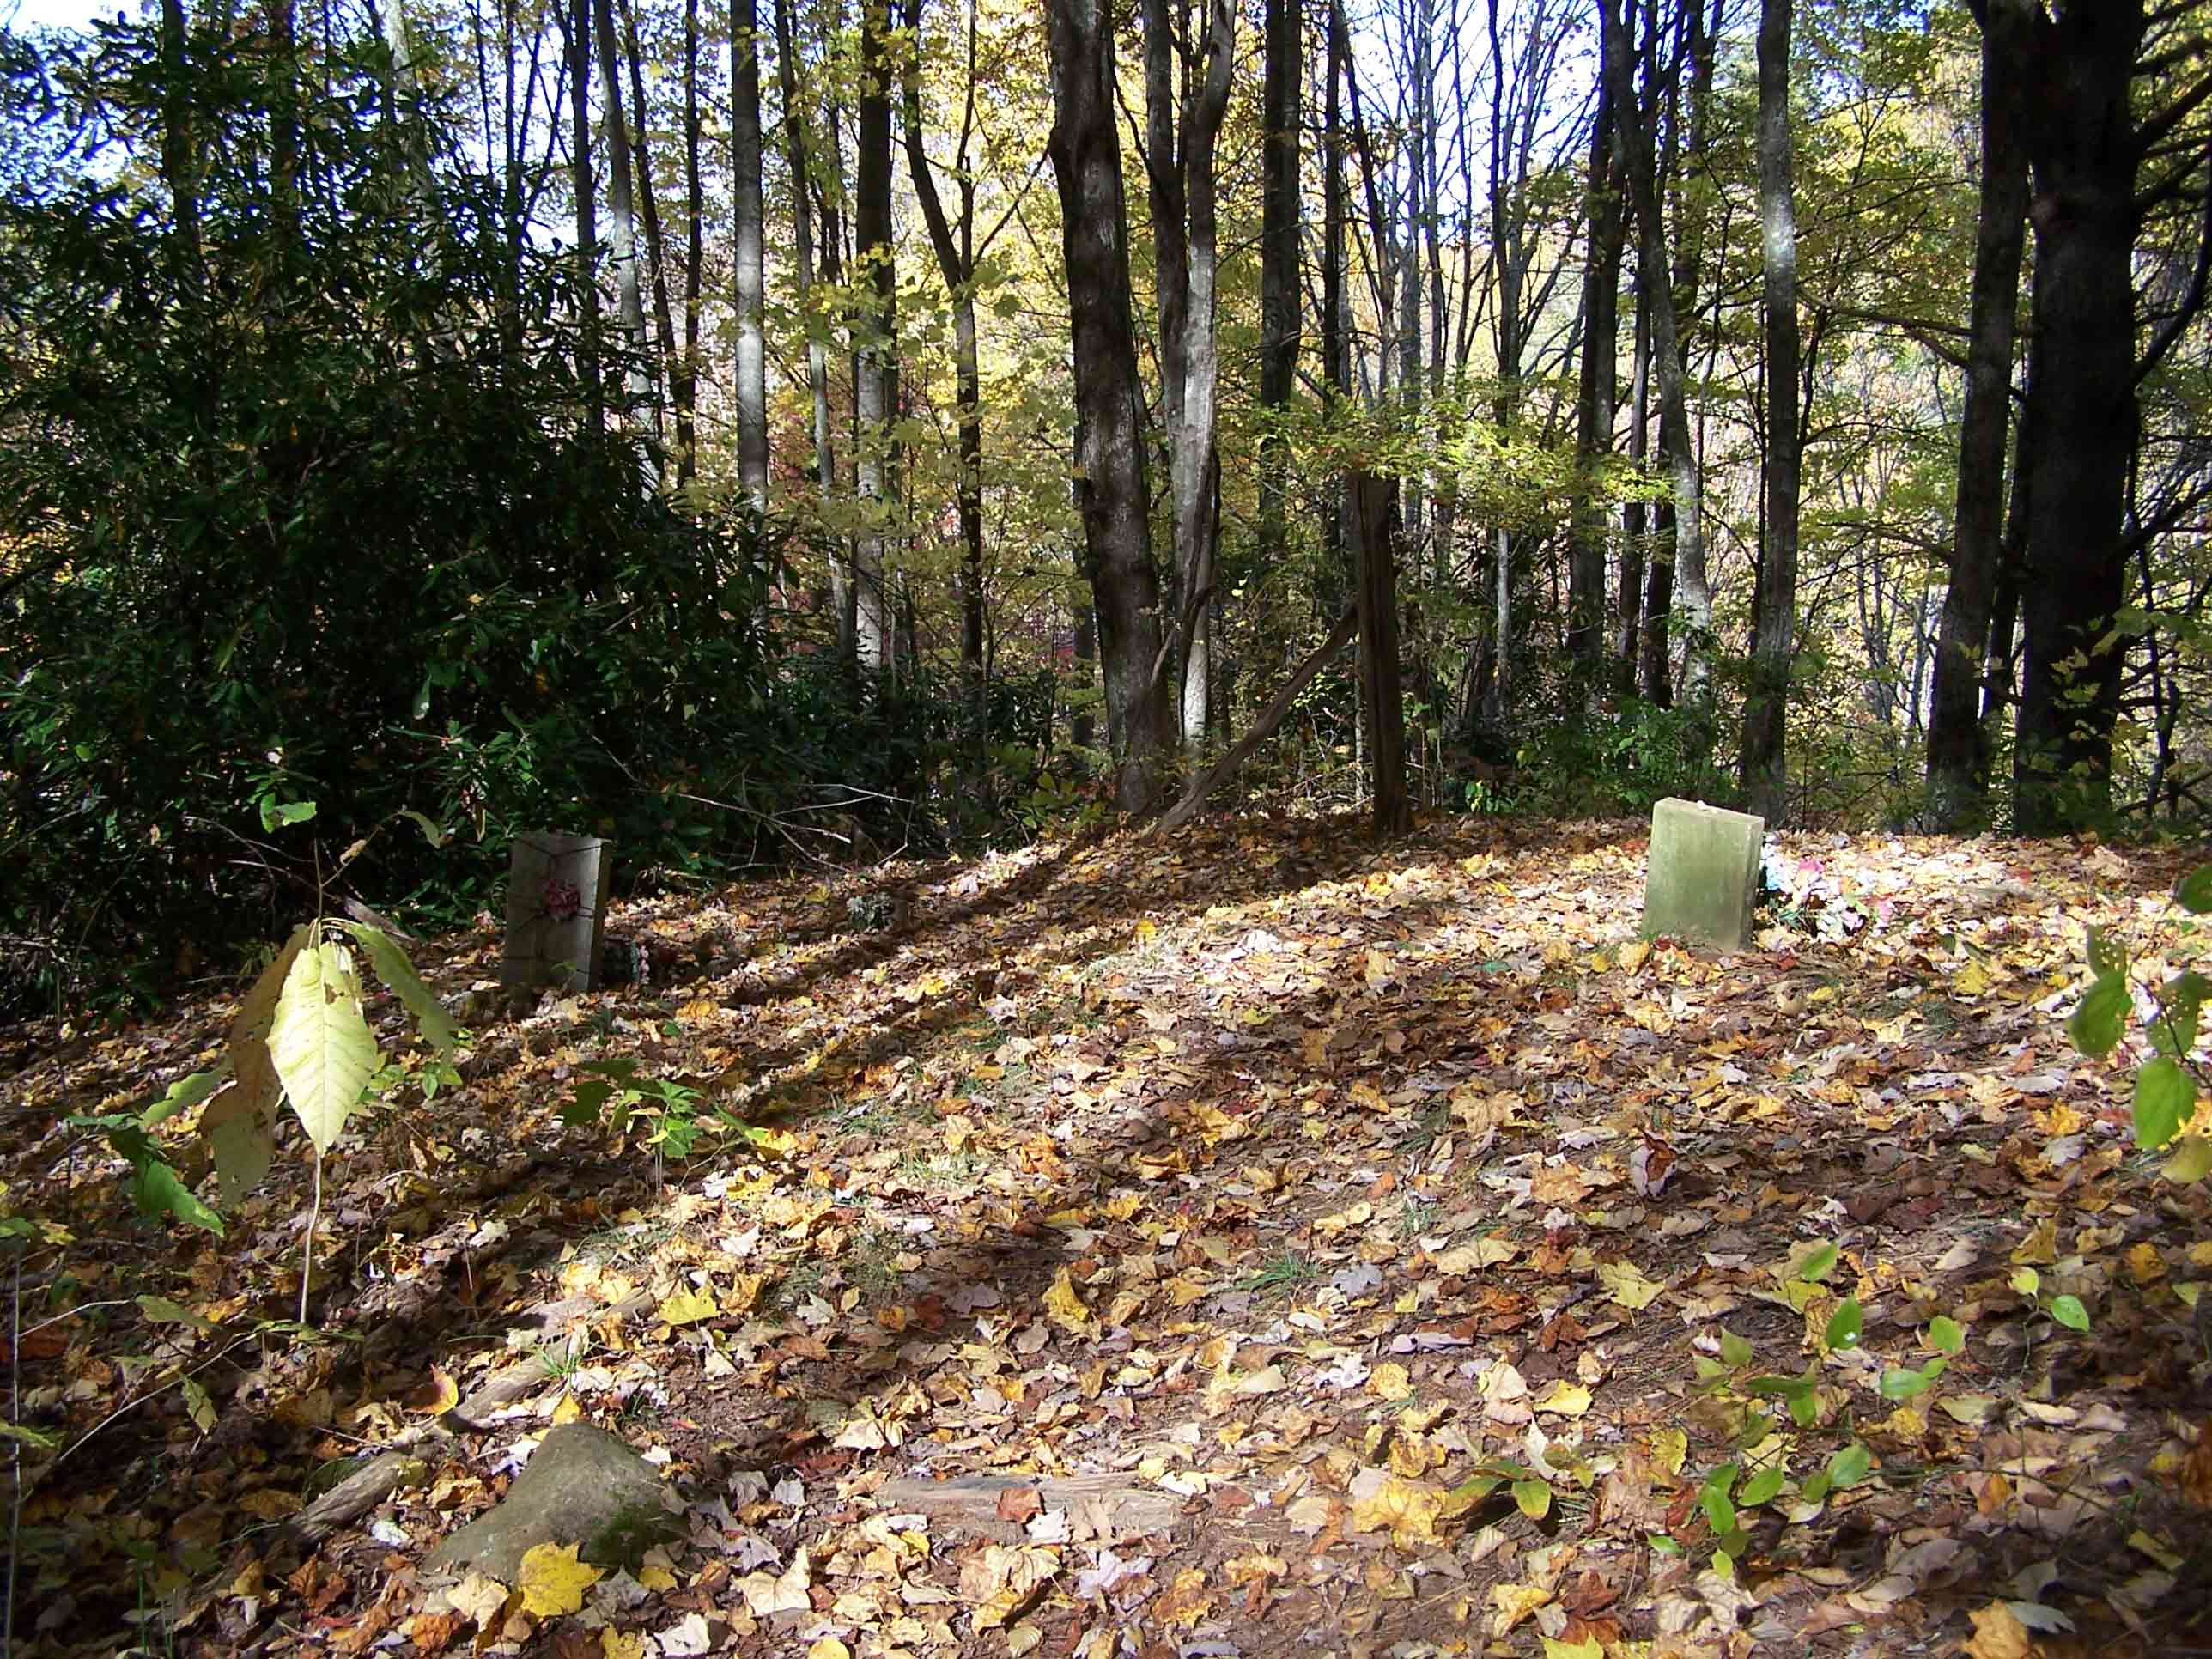 mm 7.7 - Small cemetery. Courtesy at@rohland.org